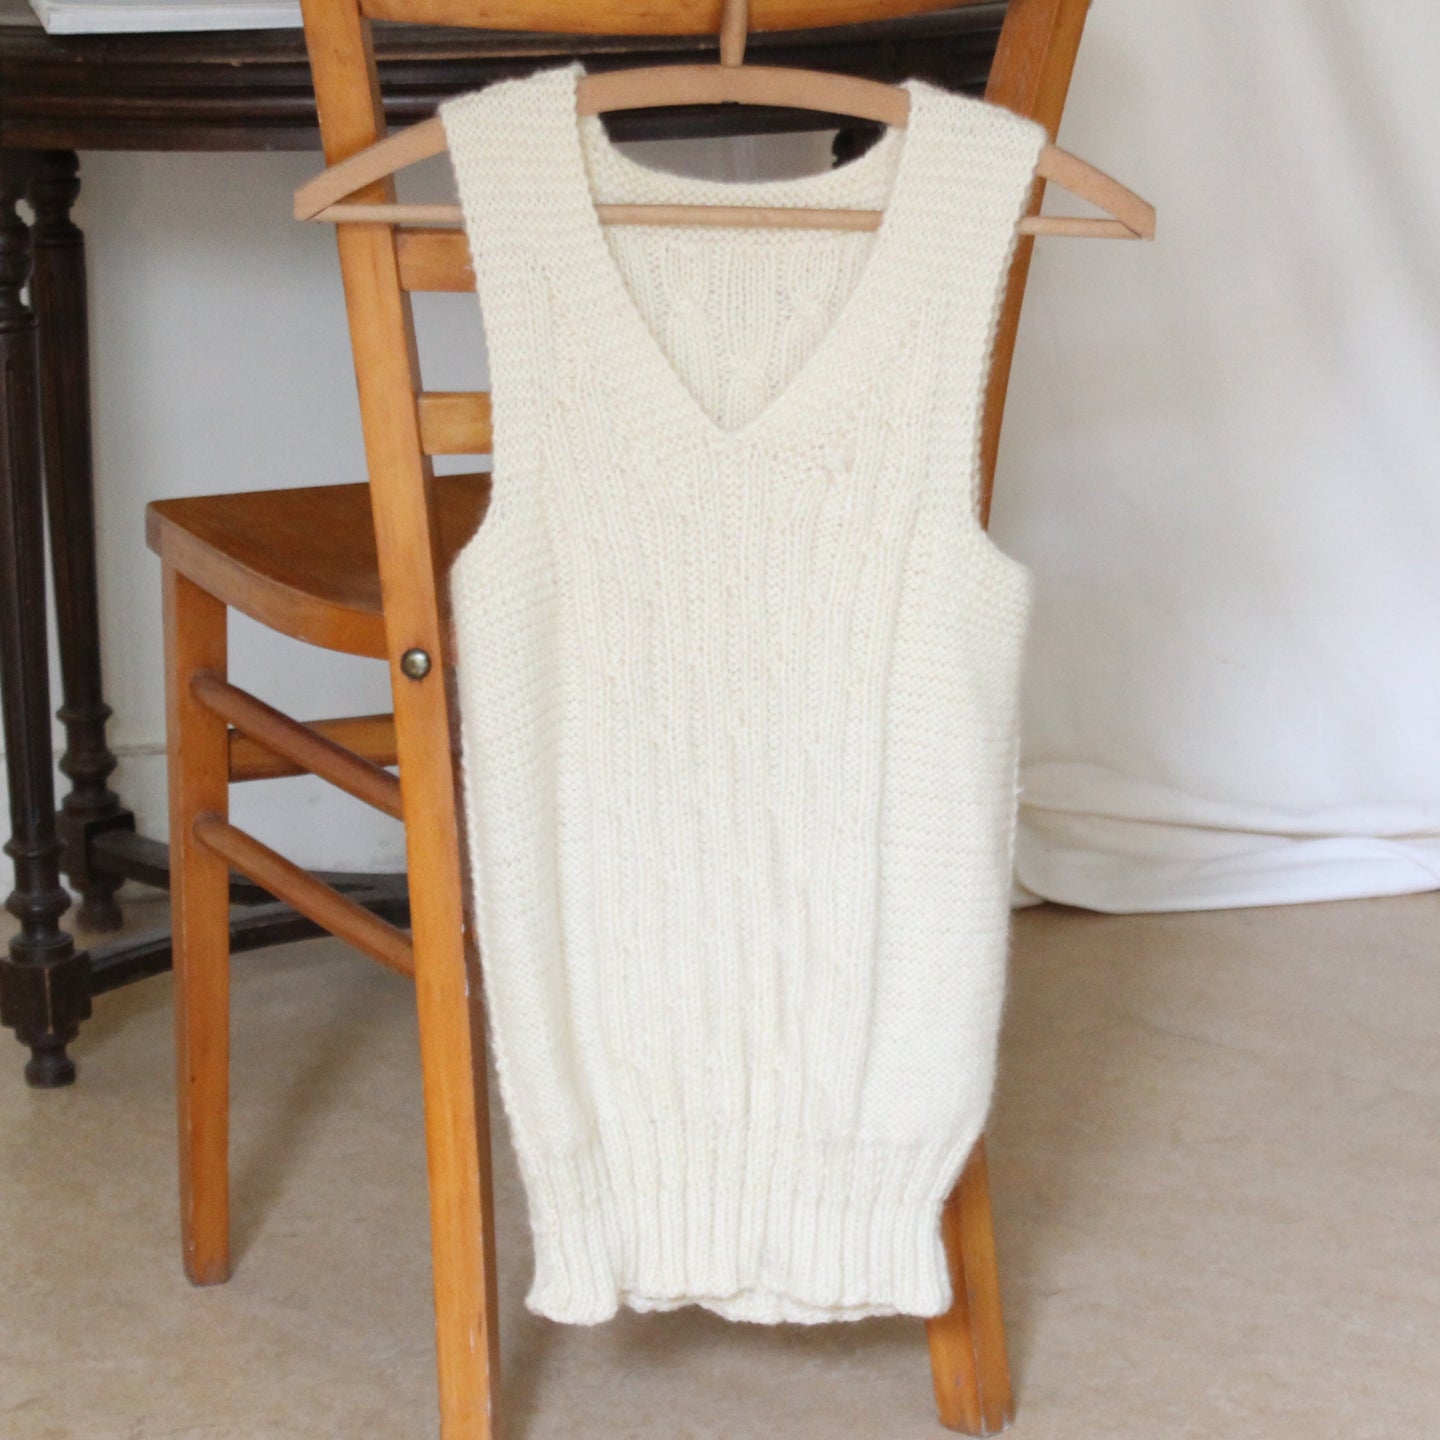 Vintage offwhite wool vest, size S